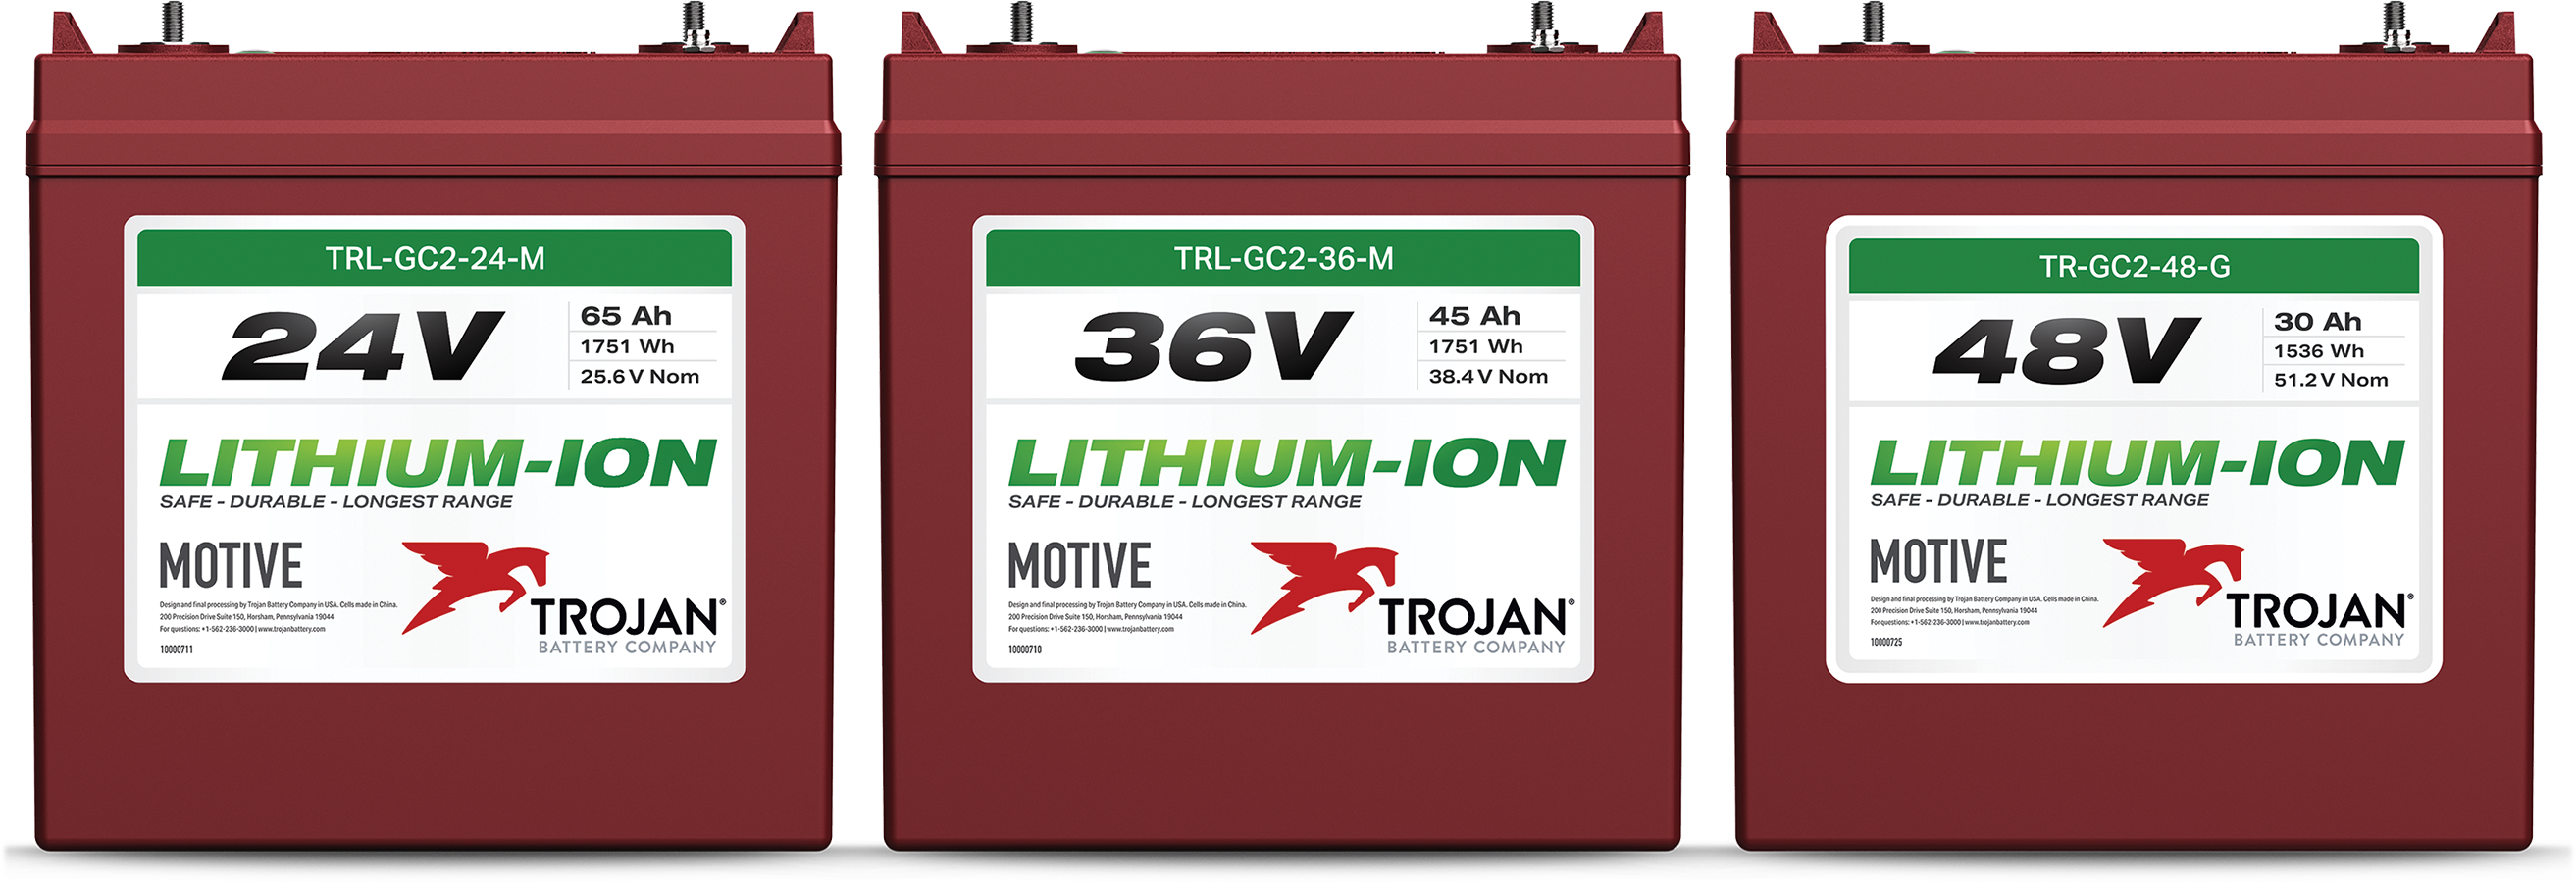 Trojan Battery Company's lithium portfolio includes 24- and 36-volt batteries for floor-cleaning equipment and the Trojan GC2 48V Lithium Ion Battery for golf and personal transportation vehicles.